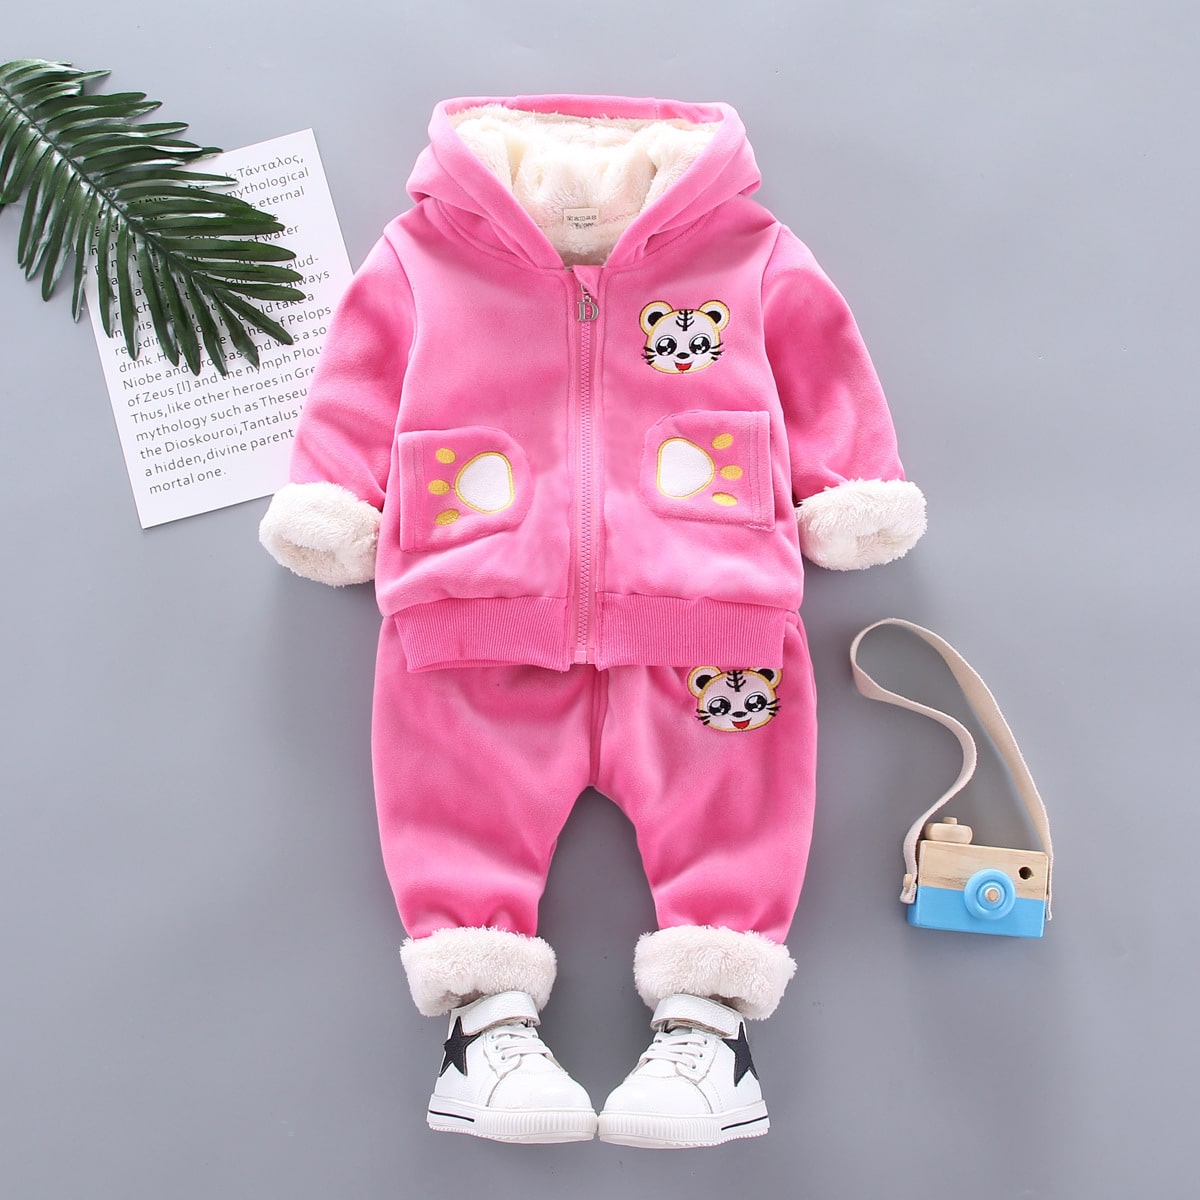 The New Children's clothing sports suit 6